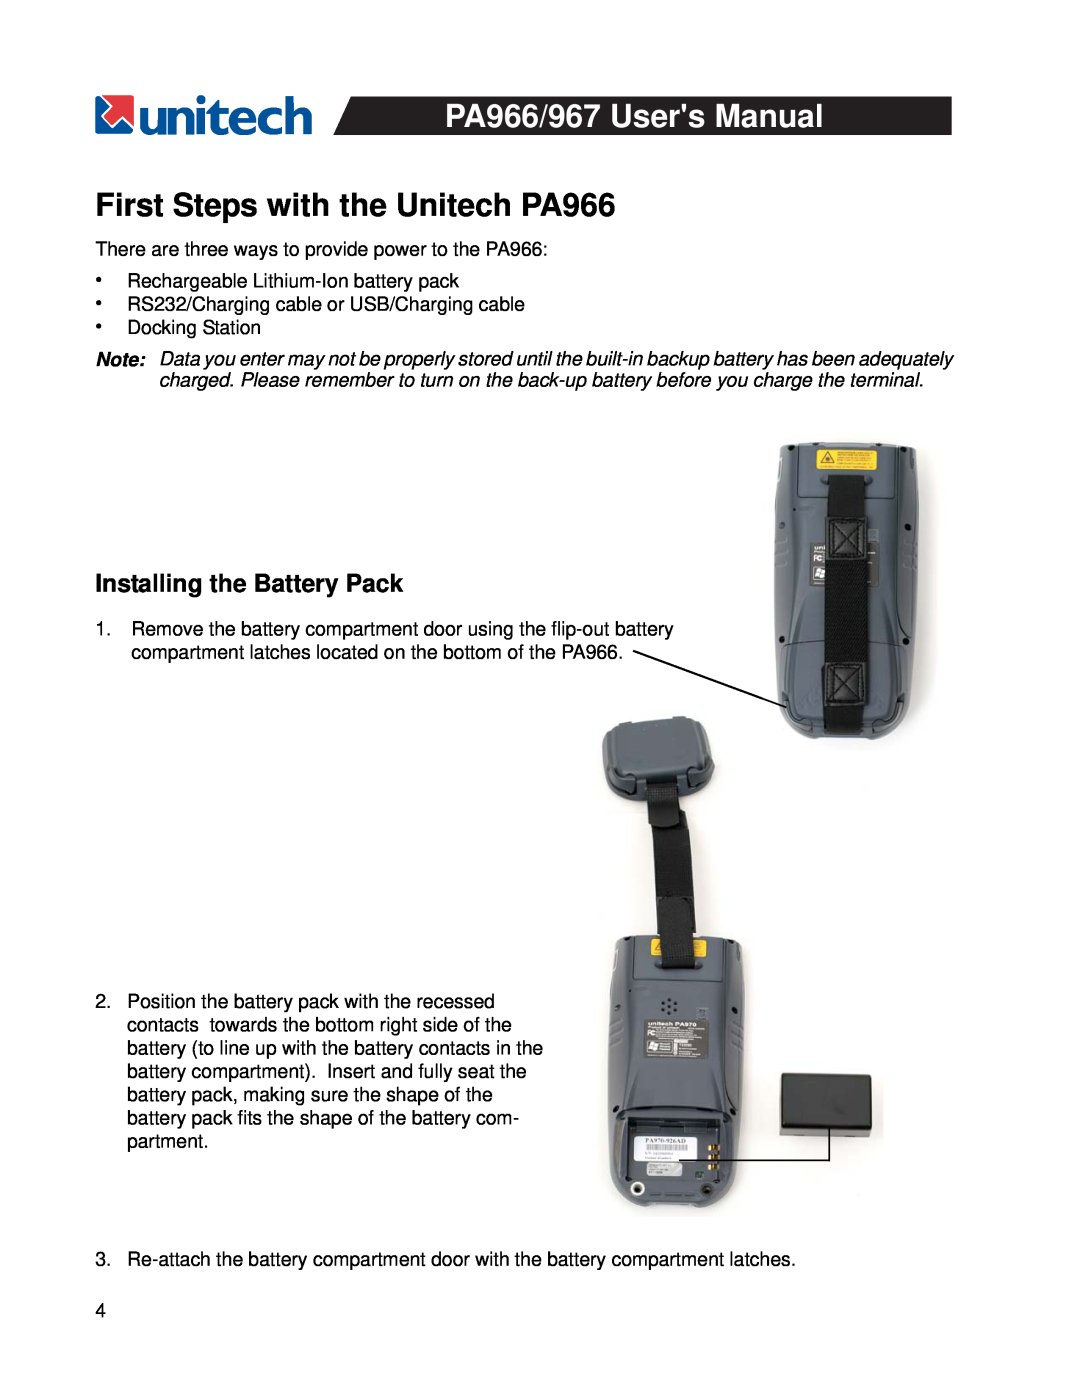 Unitech PA967 user manual First Steps with the Unitech PA966, Installing the Battery Pack 